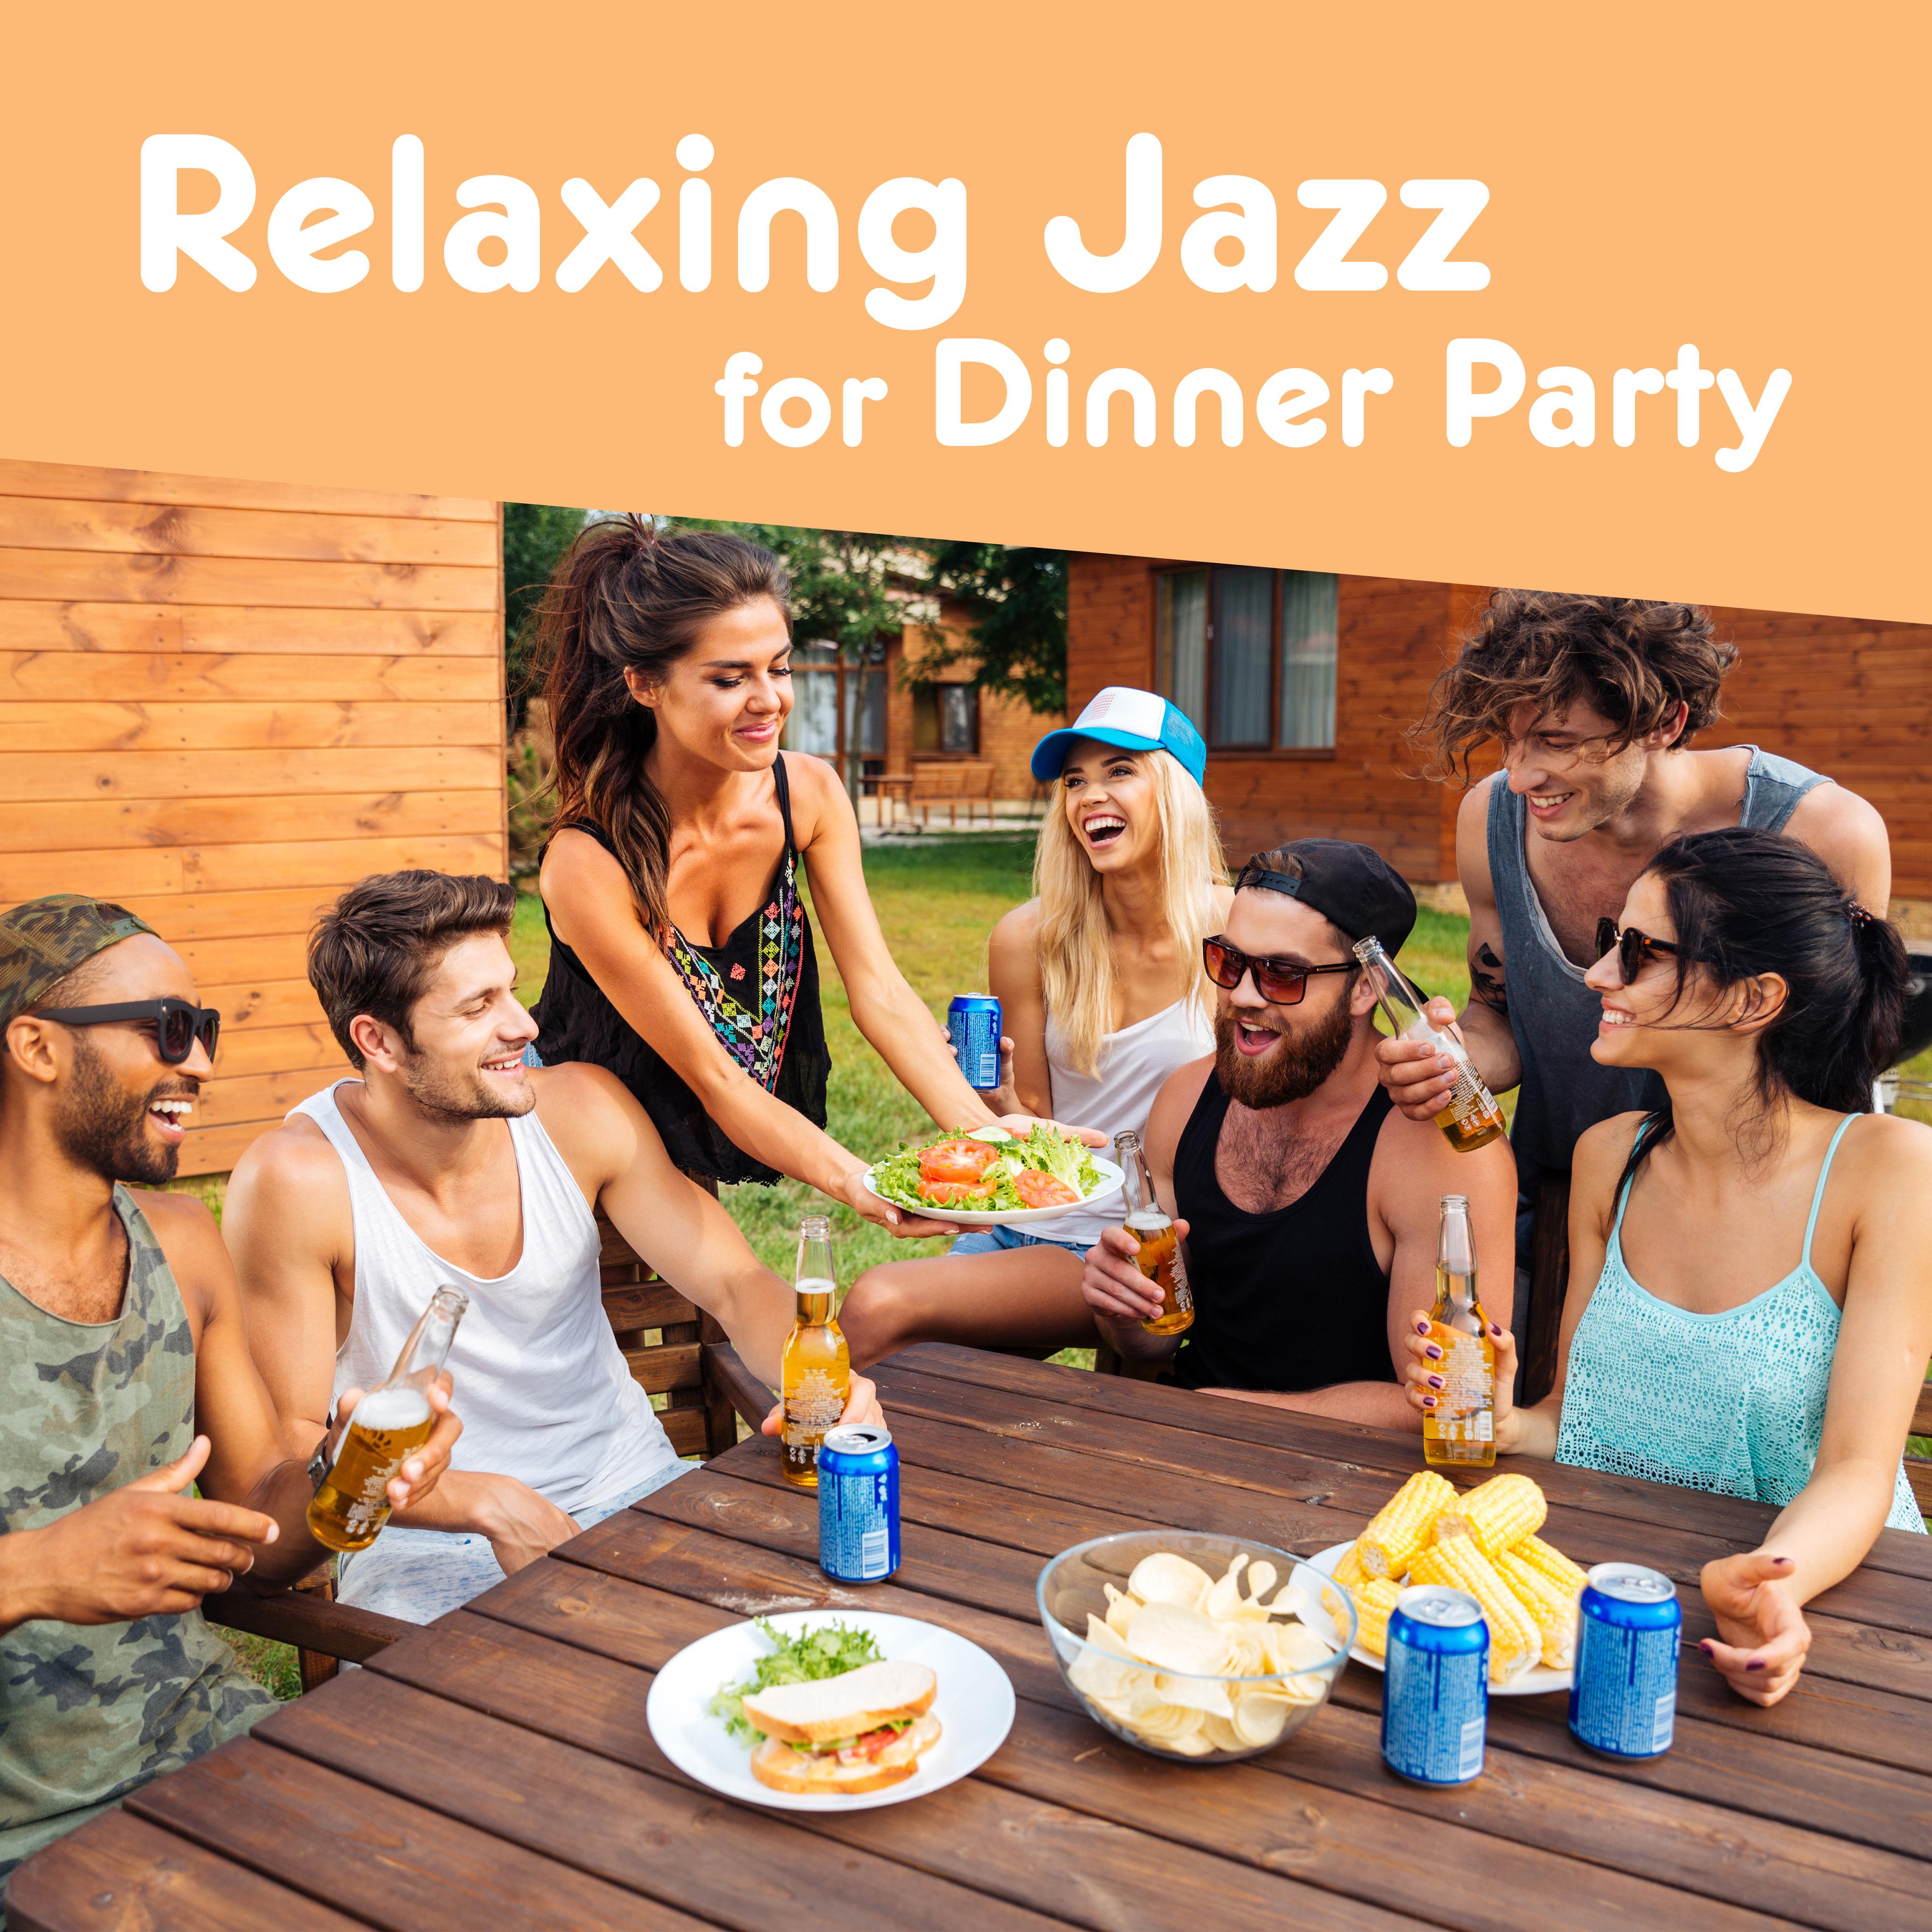 Relaxing Jazz for Dinner Party – Piano Bar, Jazz Cafe, Music for Restaurant, Dinner with Friends, Pure Rest & Chill